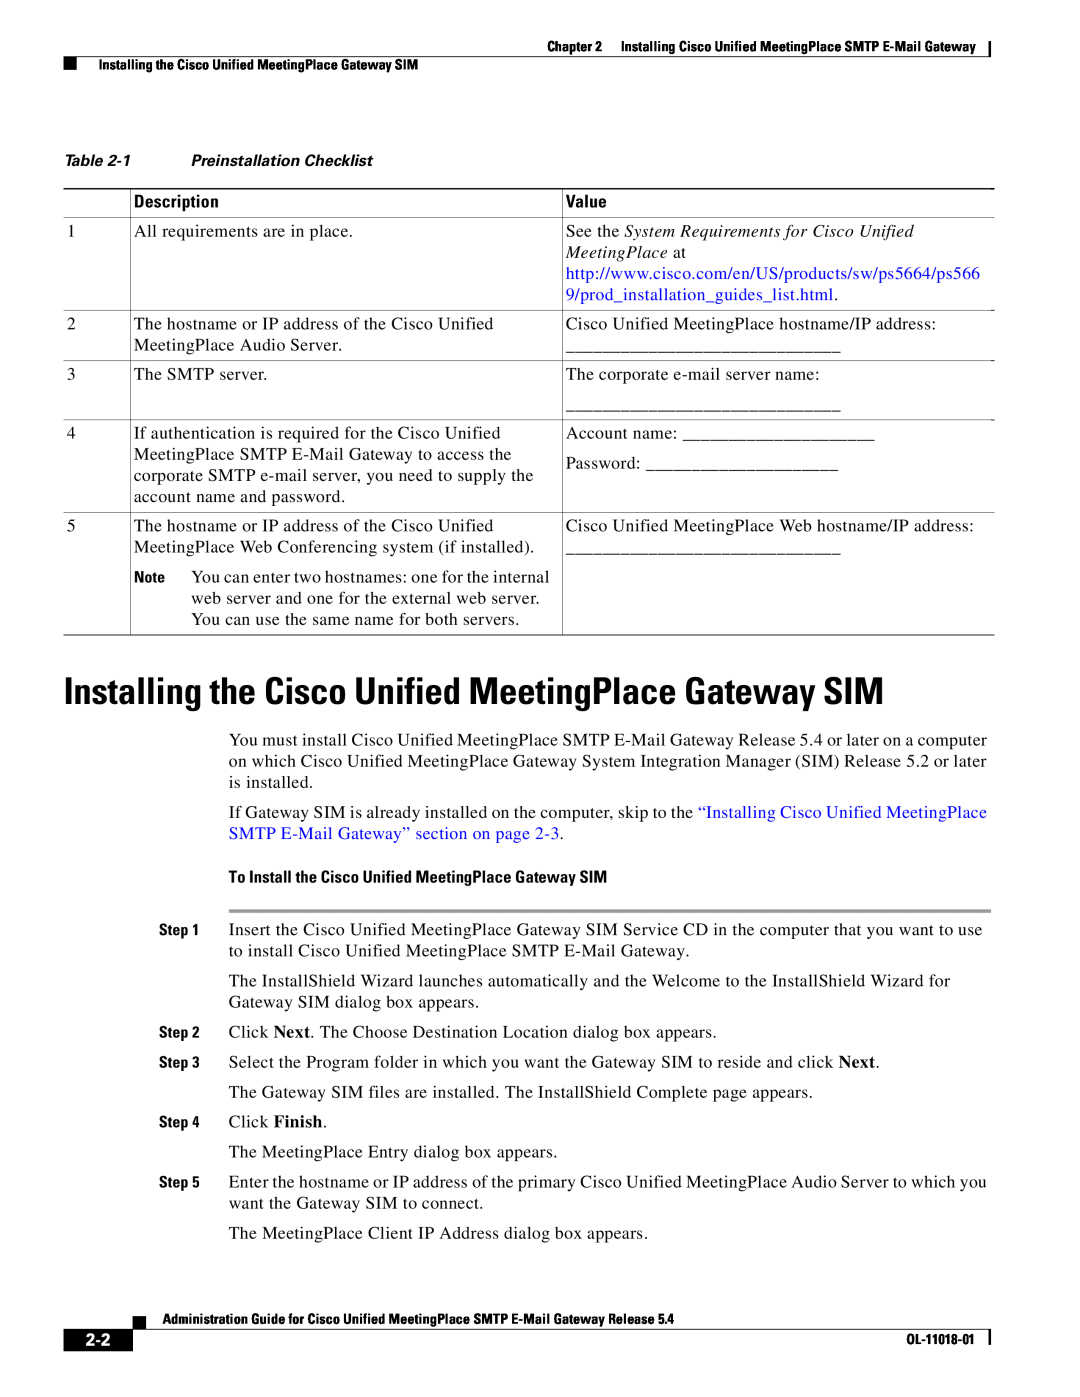 Cisco Systems SMTP manual Description, Value, See the System Requirements for Cisco Unified, MeetingPlace at 